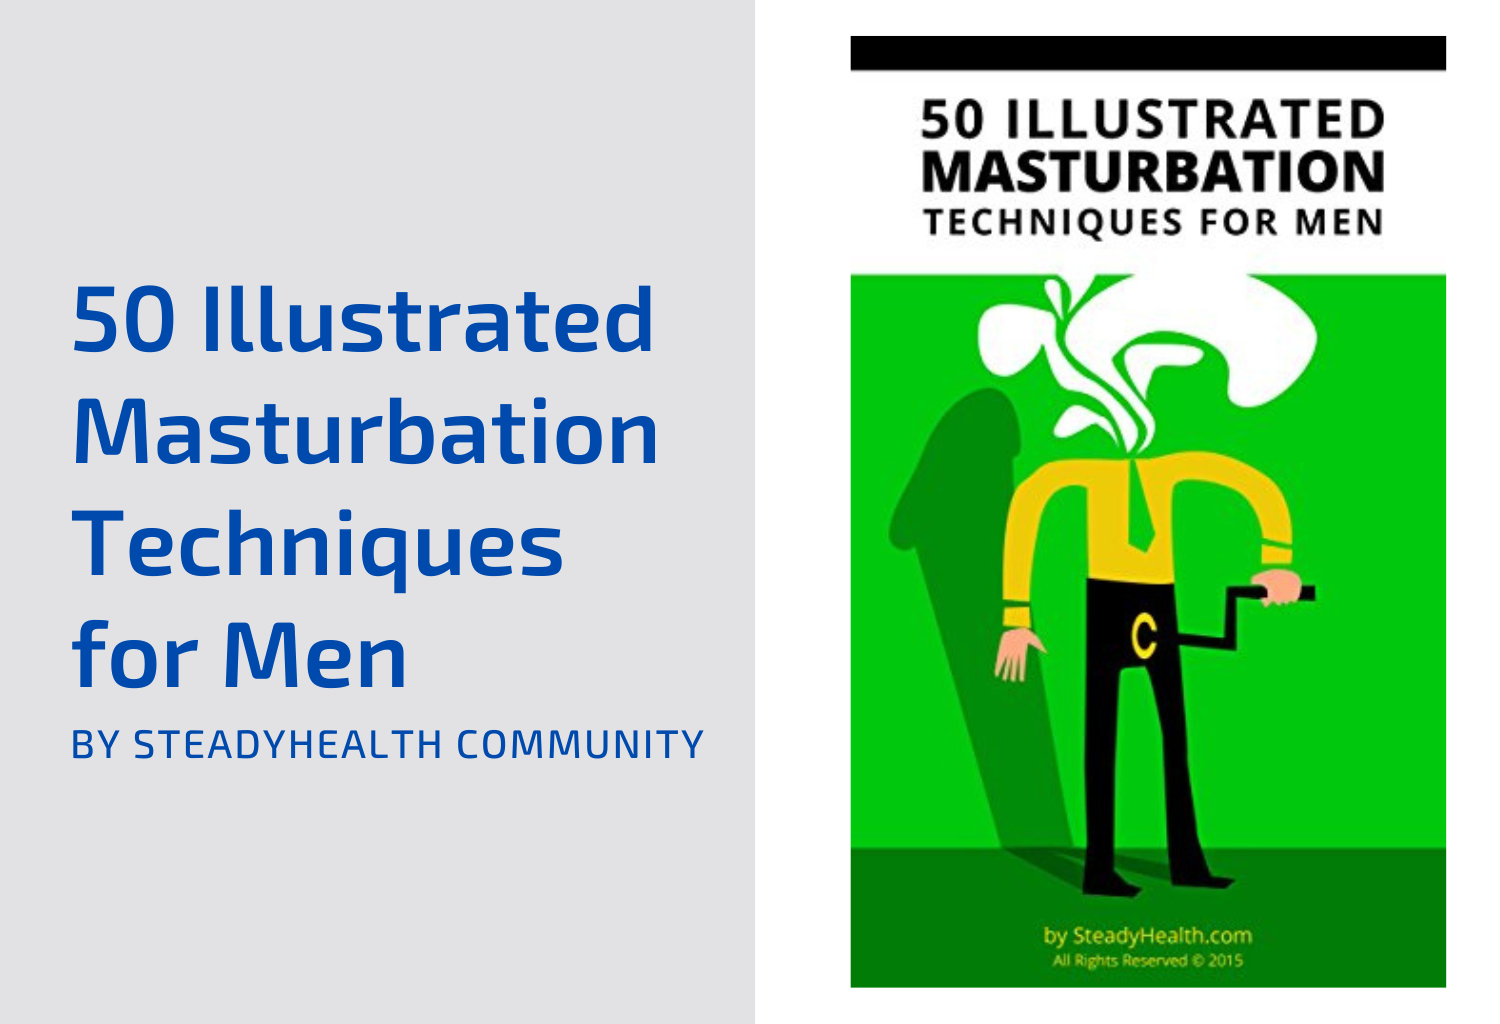 50 Illustrated Masturbation Techniques for Men by SteadyHealth Community